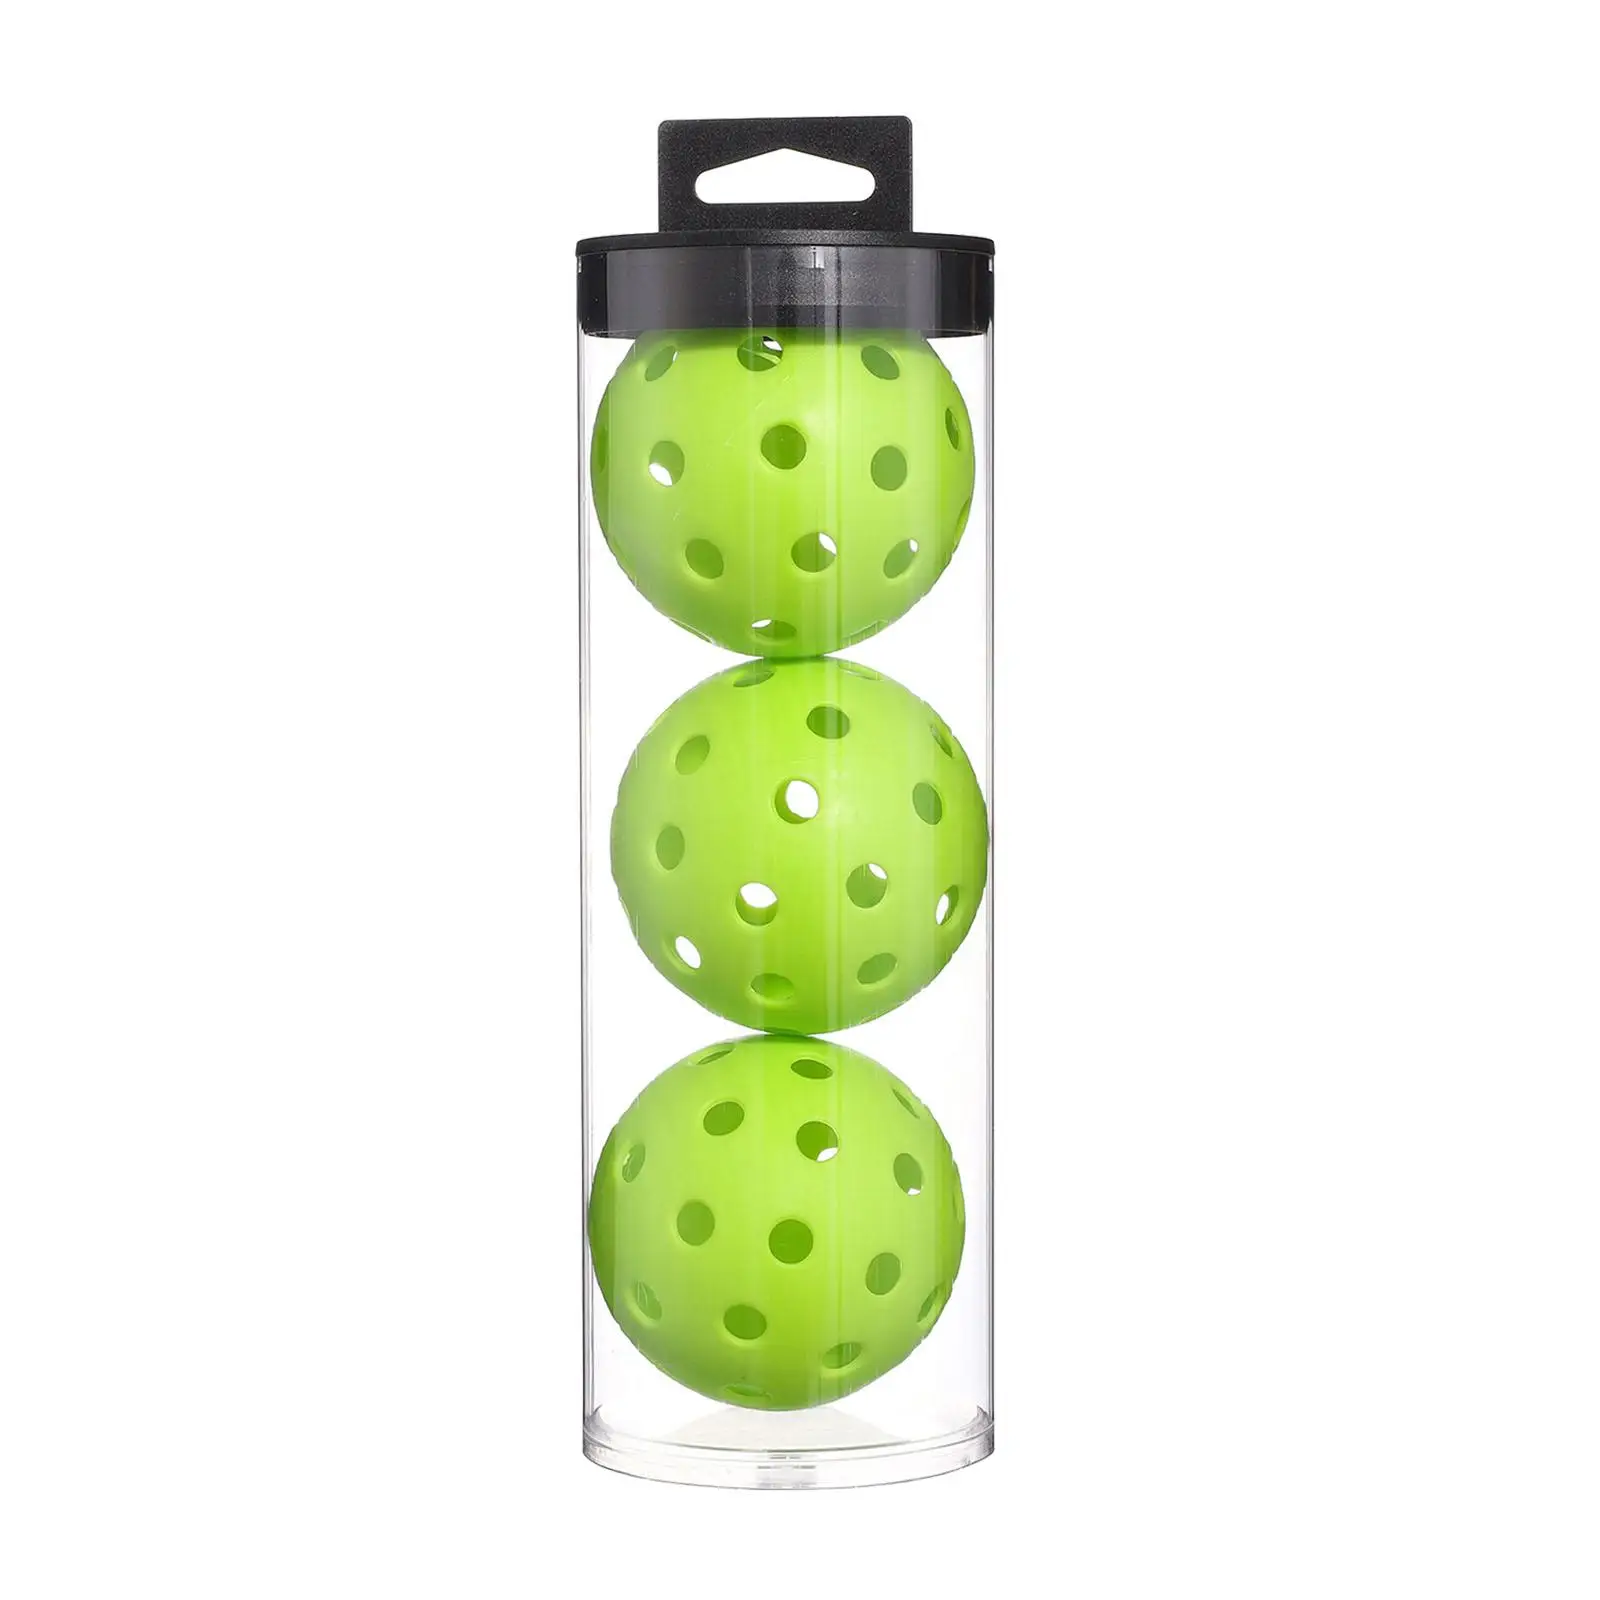 3Pcs Pickleball Ball Professional with 40 Holes Practice Toy Ball for Outdoor Courts Training Practice Tournament Play Adult